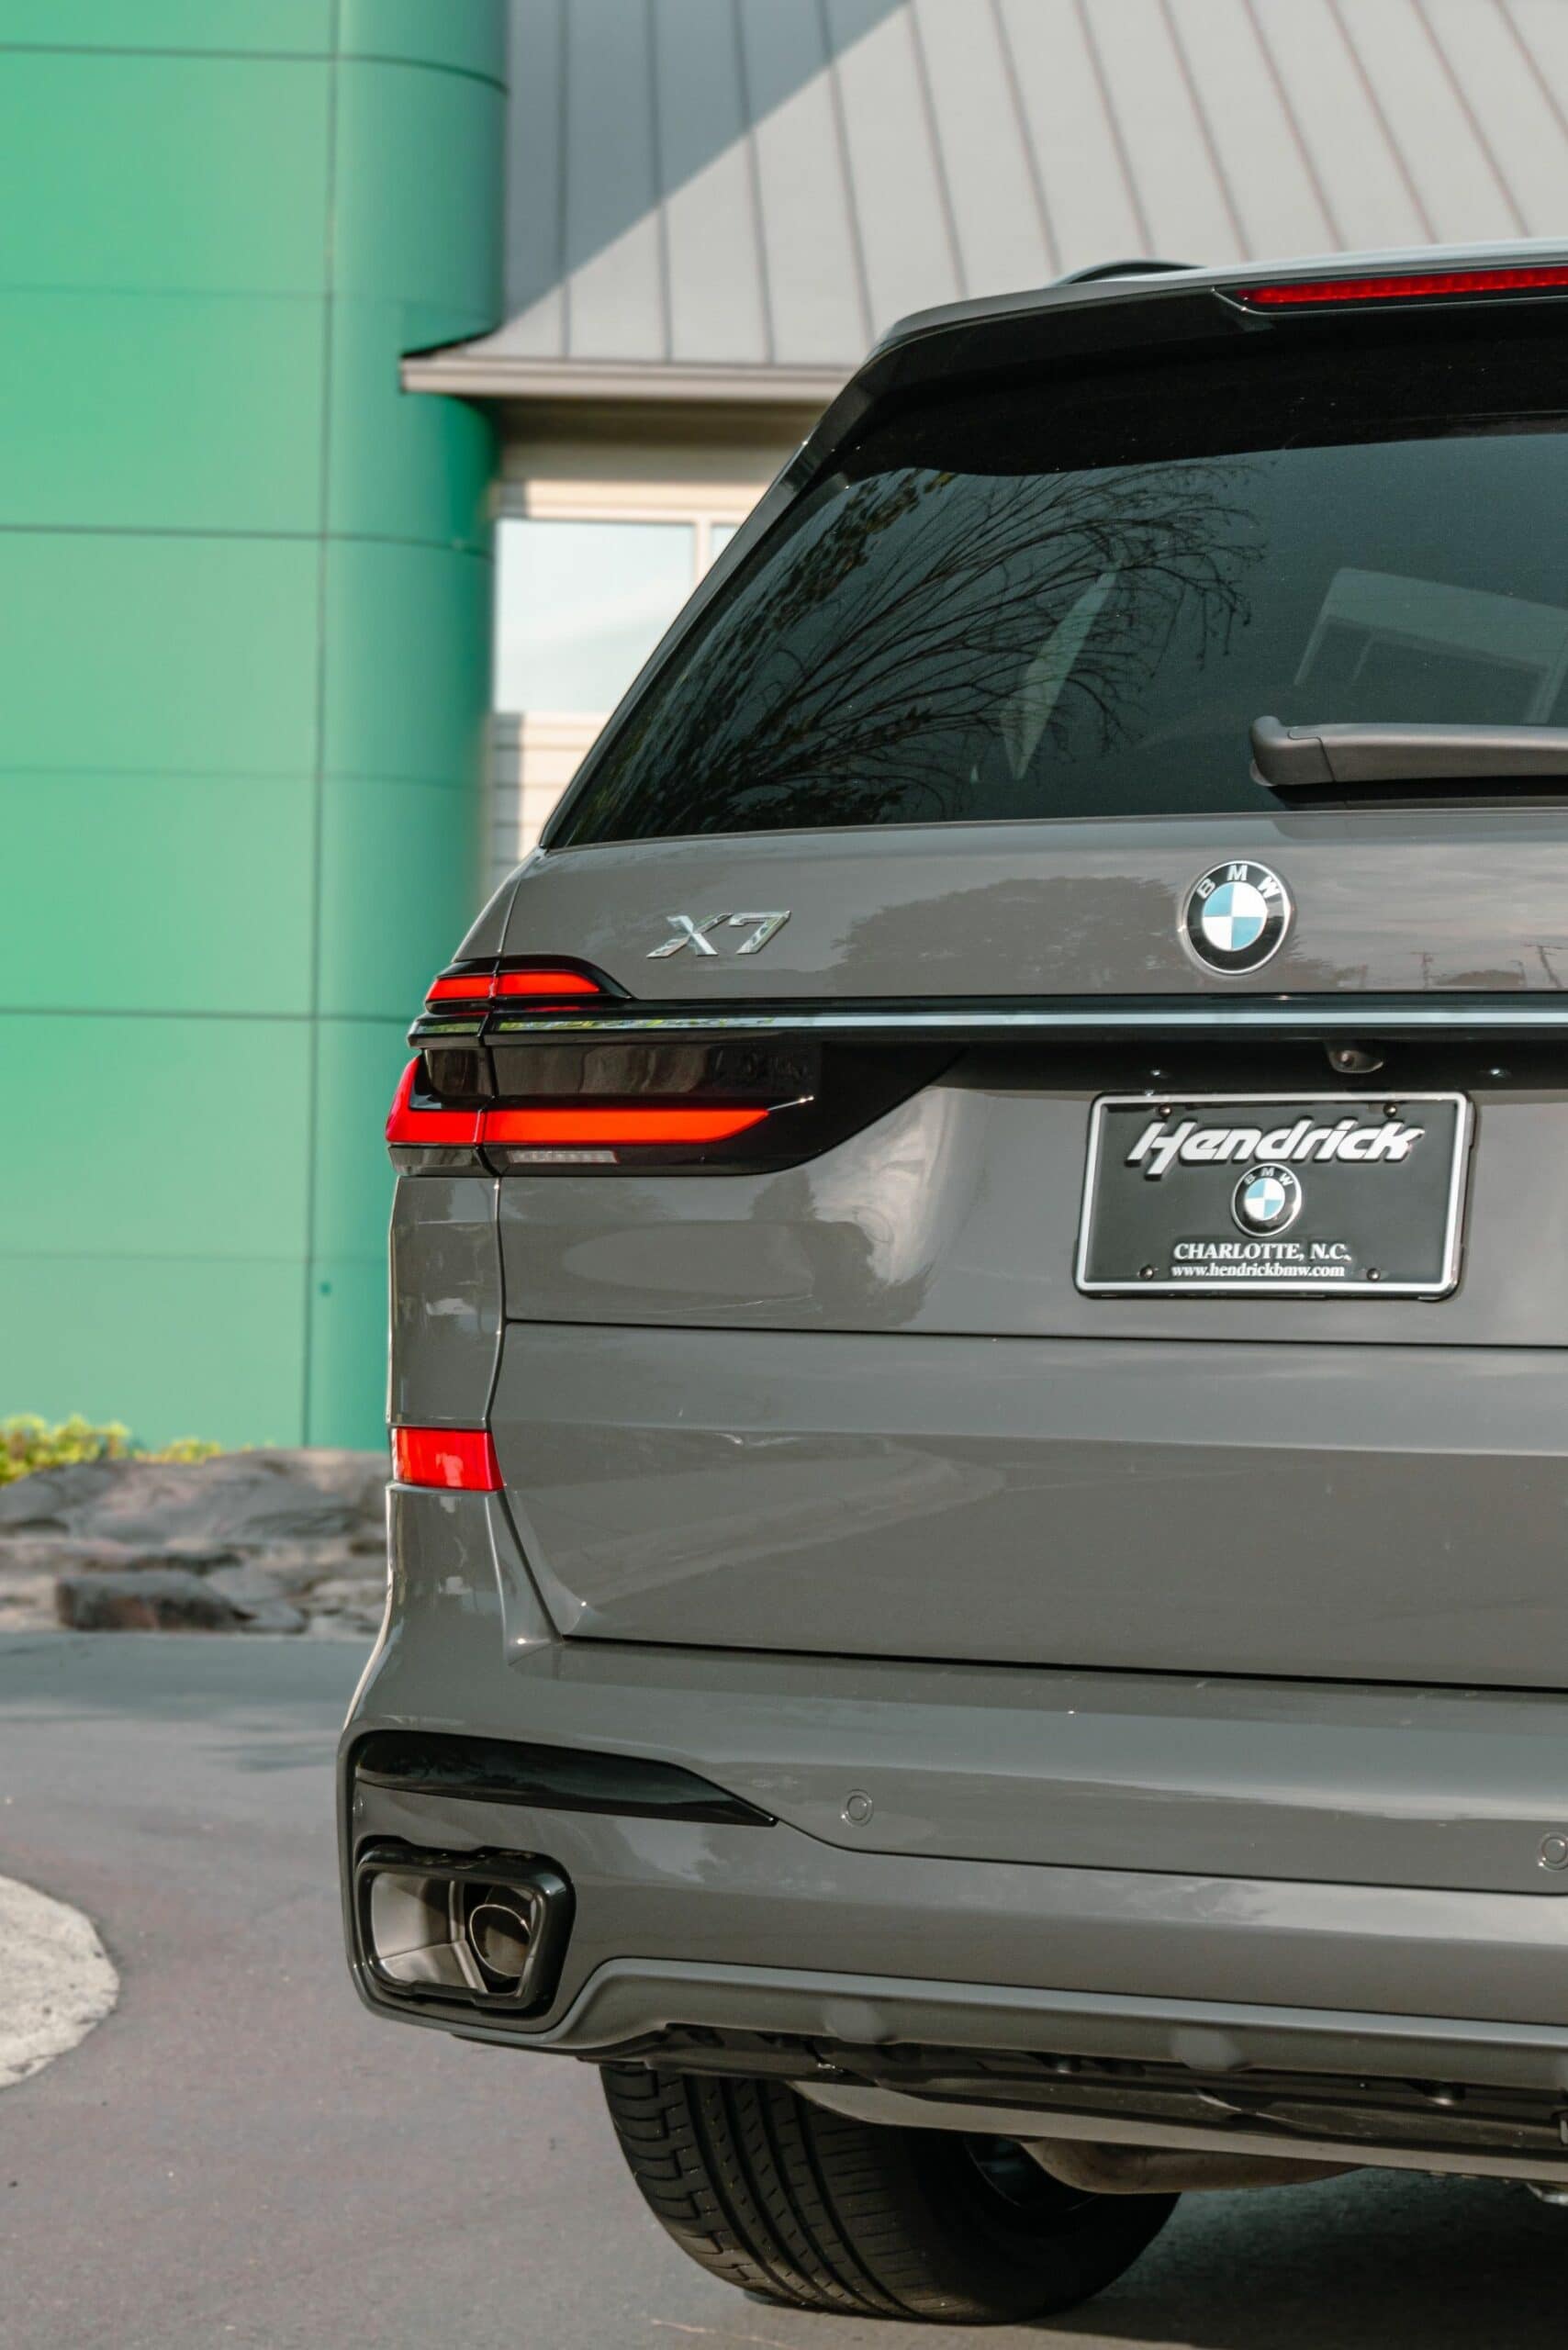 First look at the 2023 BMW X7 Facelift in Dravit Gray